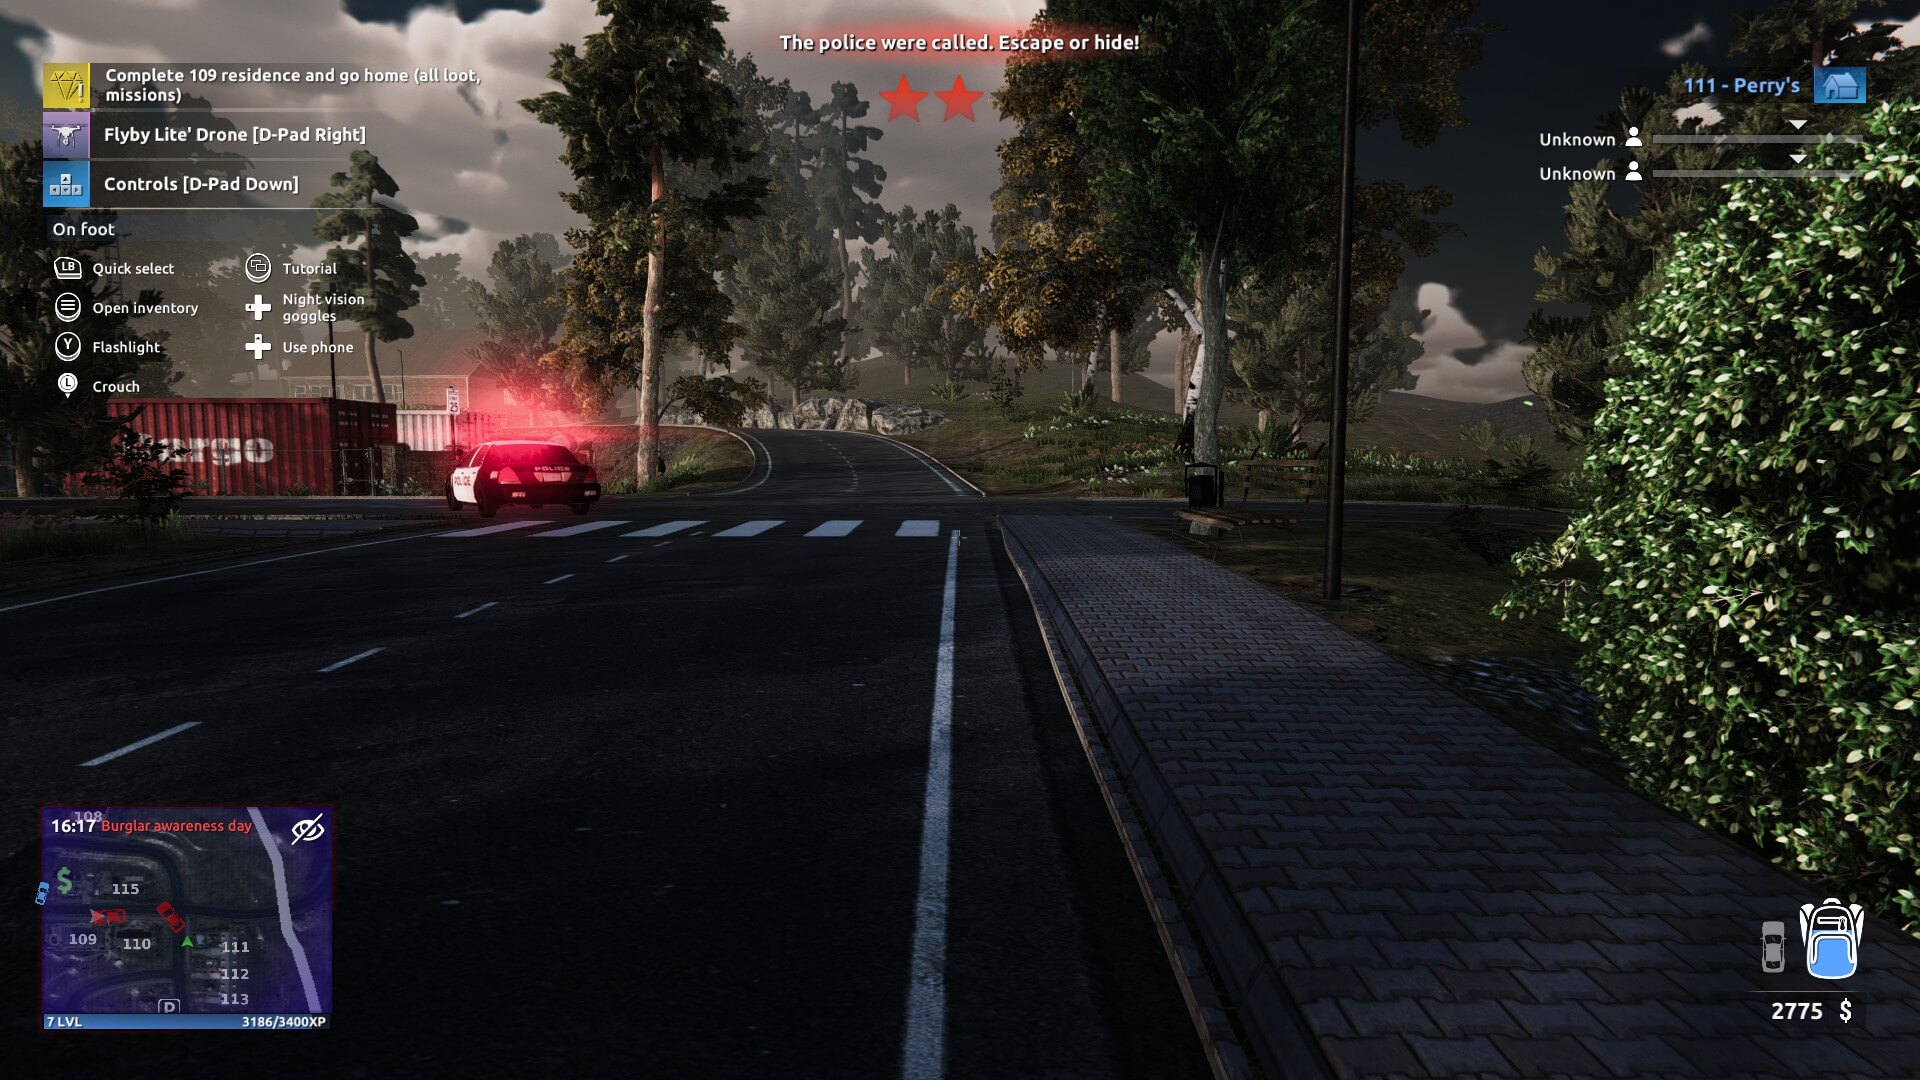 I have a two-star wanted level, the police car is directly in front of me and the officer has begun to look for me. The mini-map in the bottom left flashes red and blue while I'm being chased.